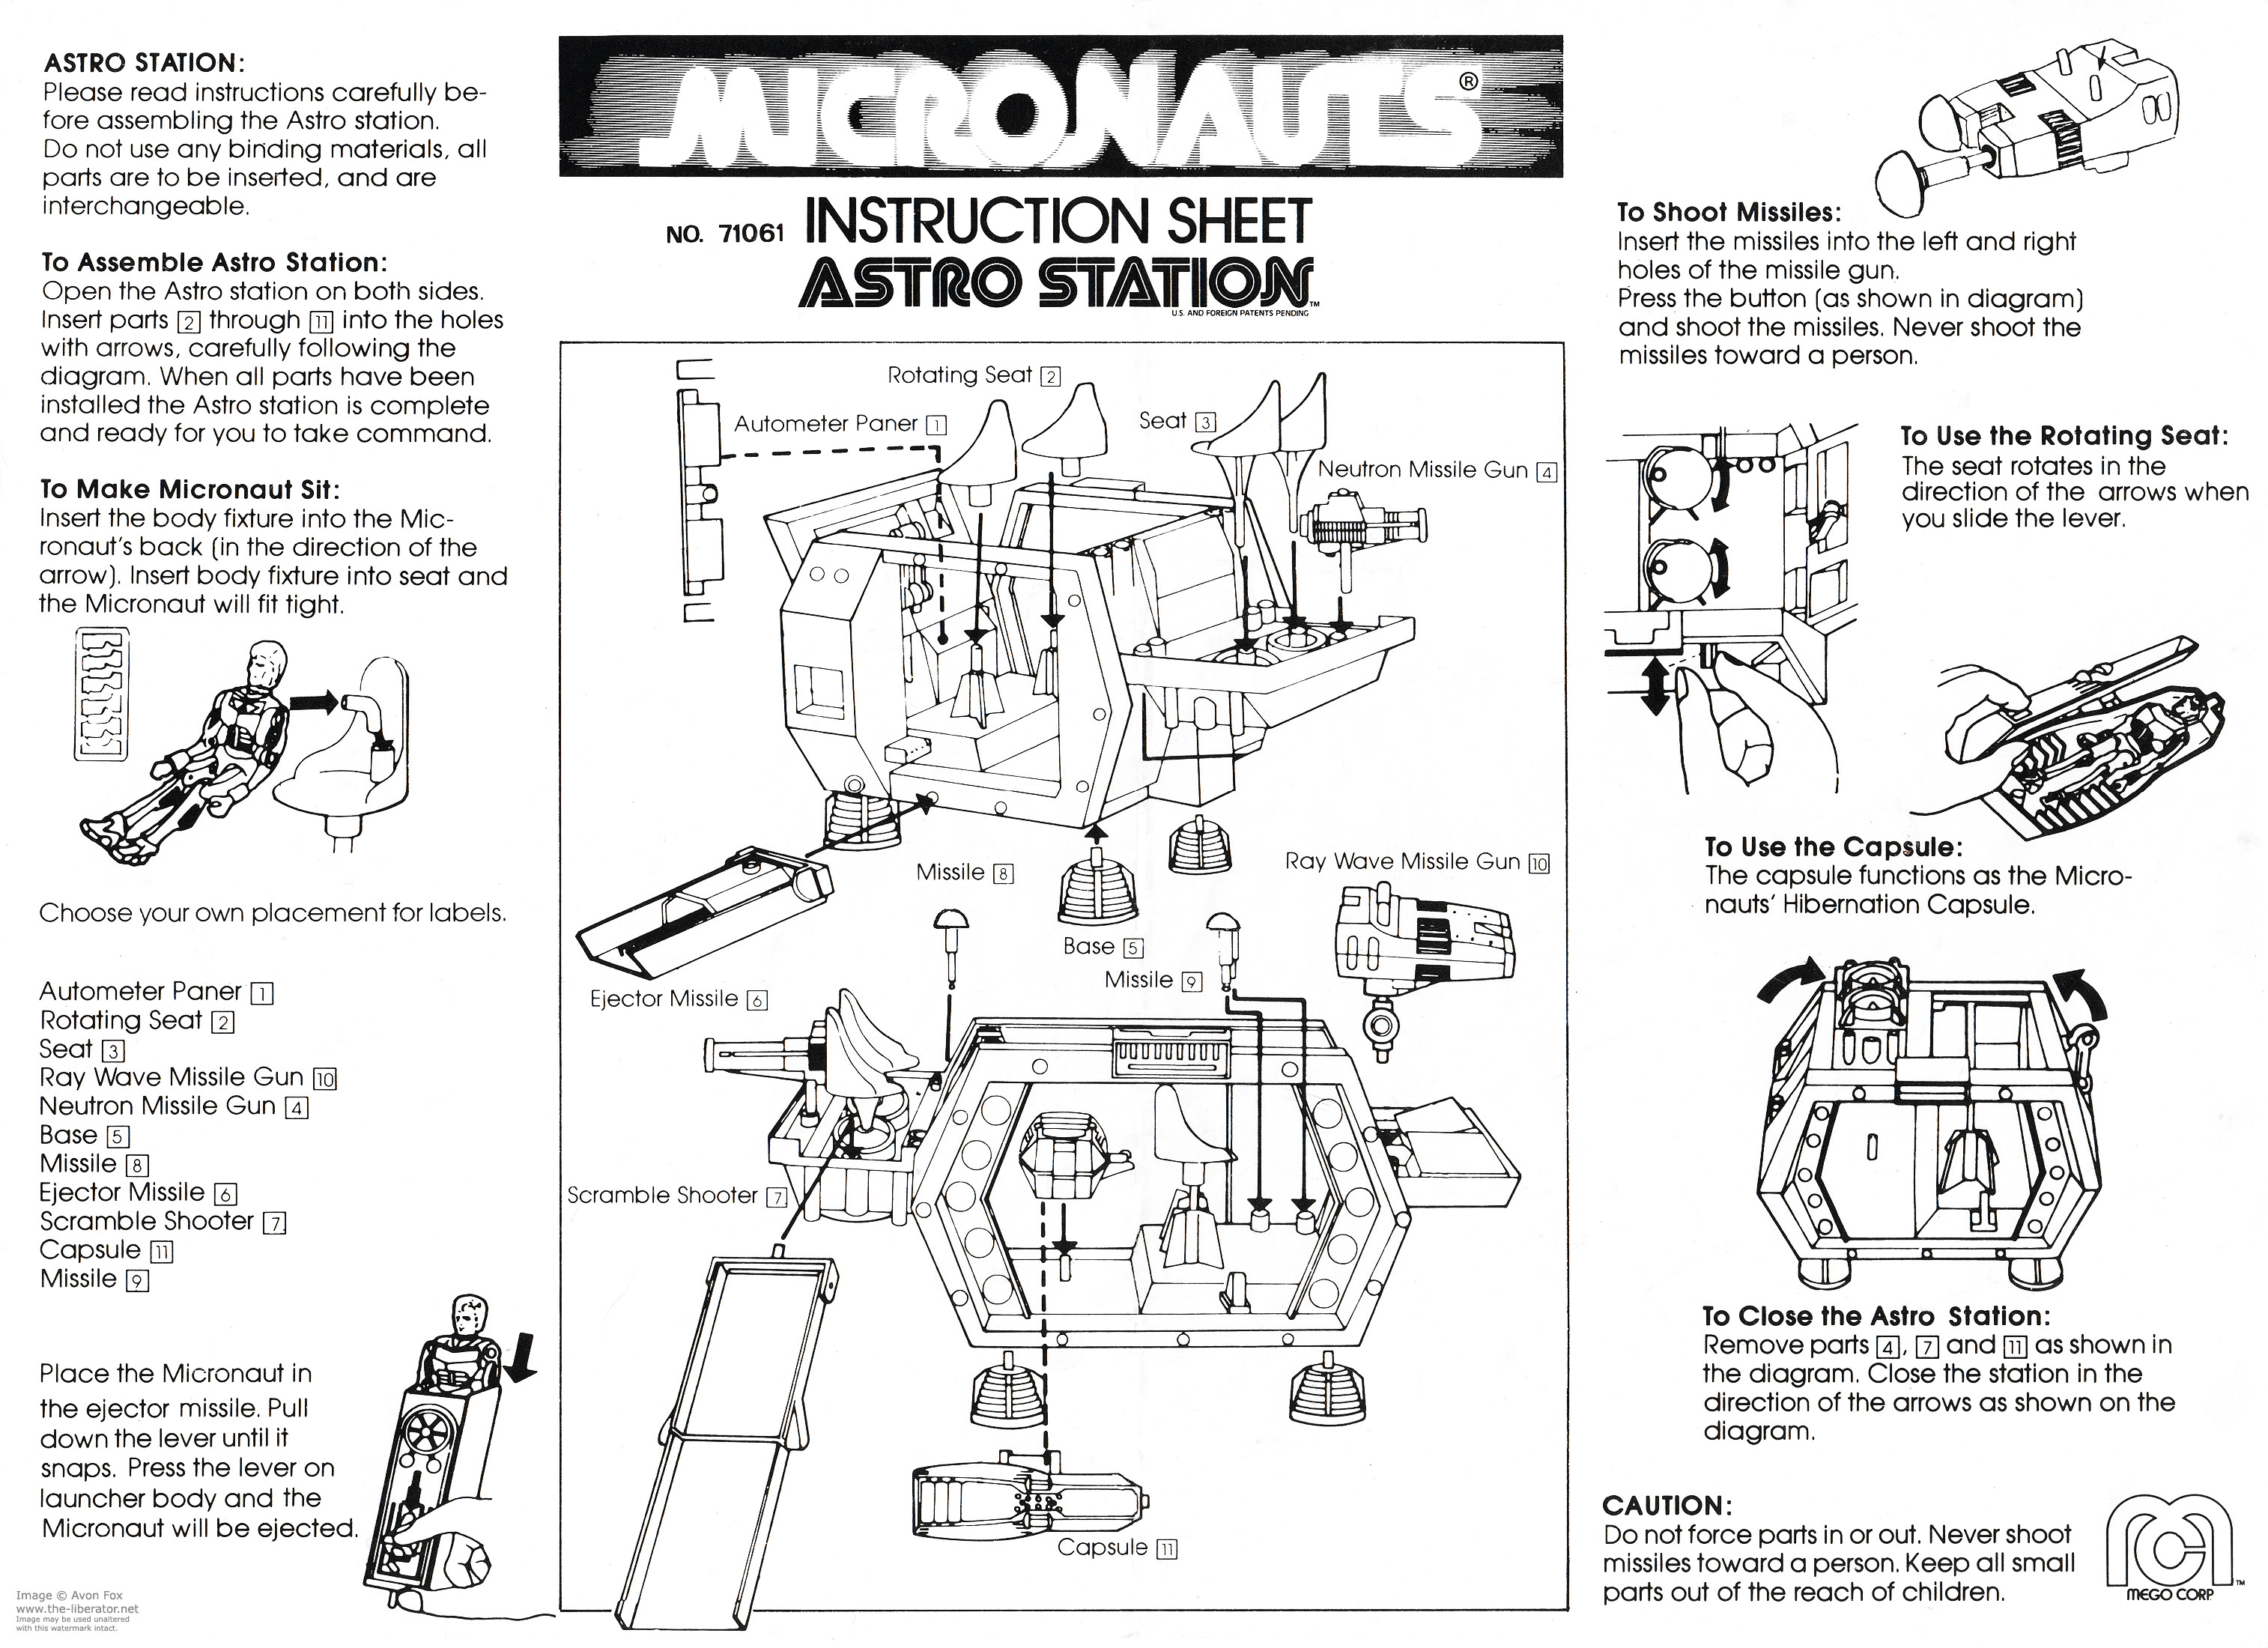 Astro Station instructions